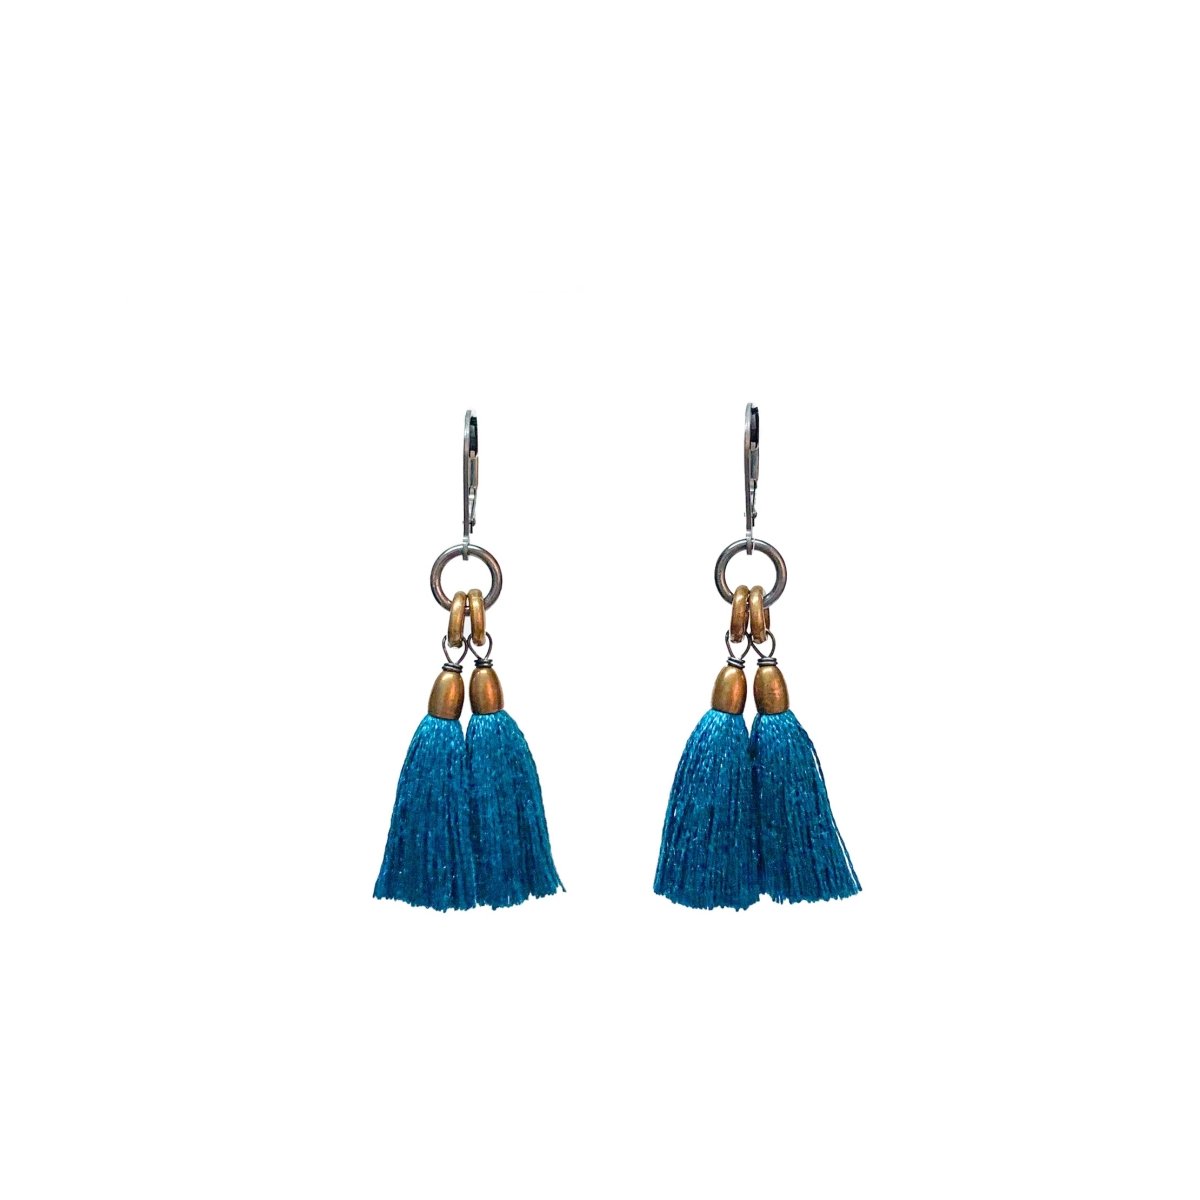 A pair of dangling earrings with teal tassels and brass rings topped with a silver leverback. The Fan Earrings in Peacock are from Portland designer Emily Bixler of BOET.